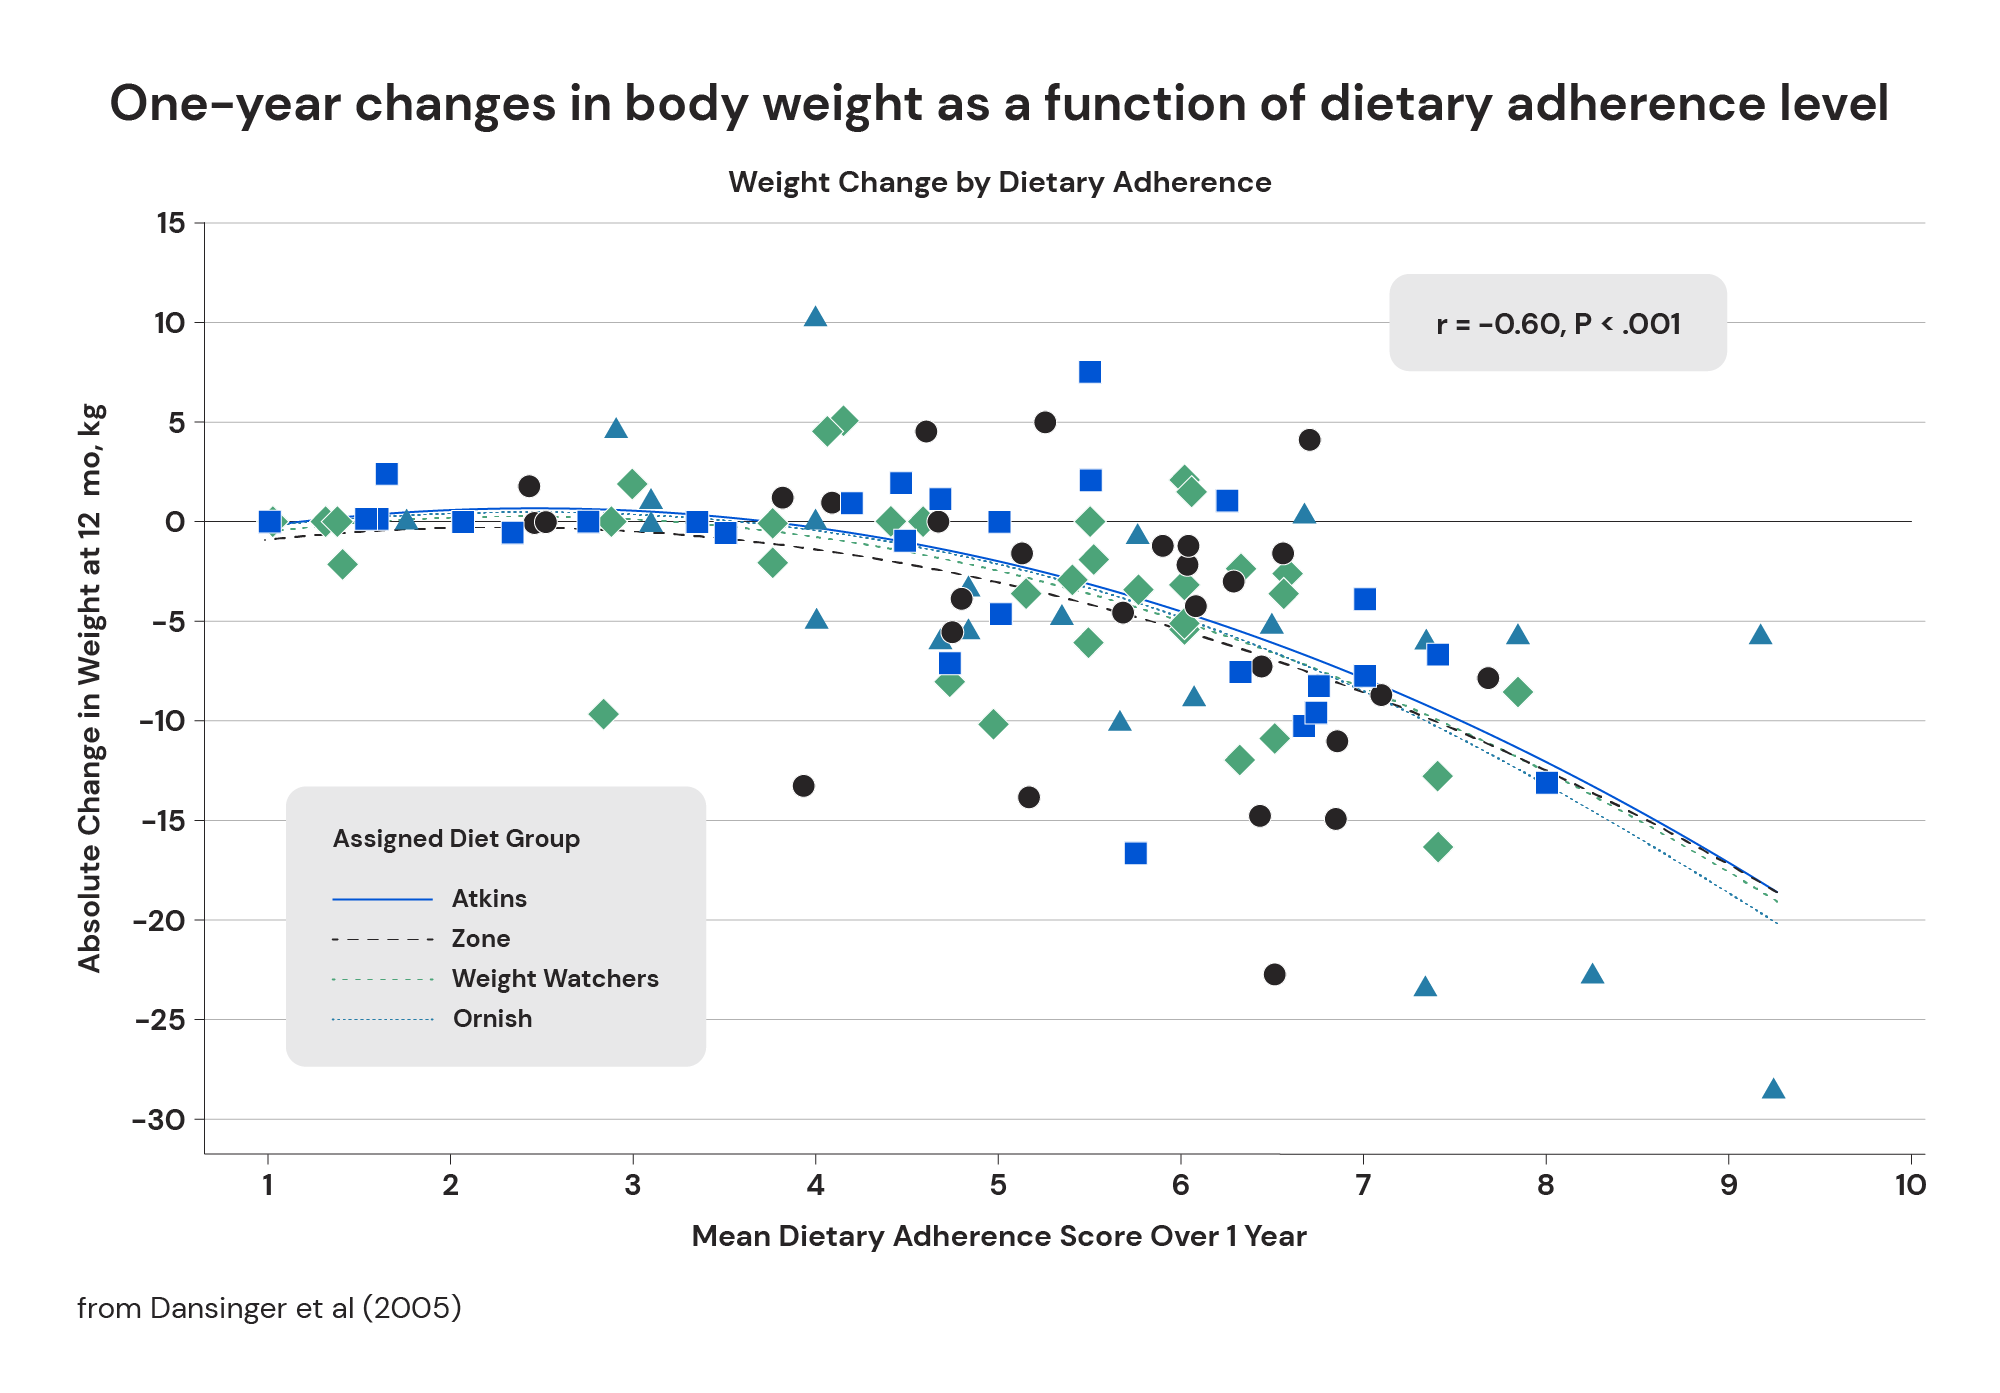 One-year changes in body weight as a function of dietary adherence level from Dansinger at al